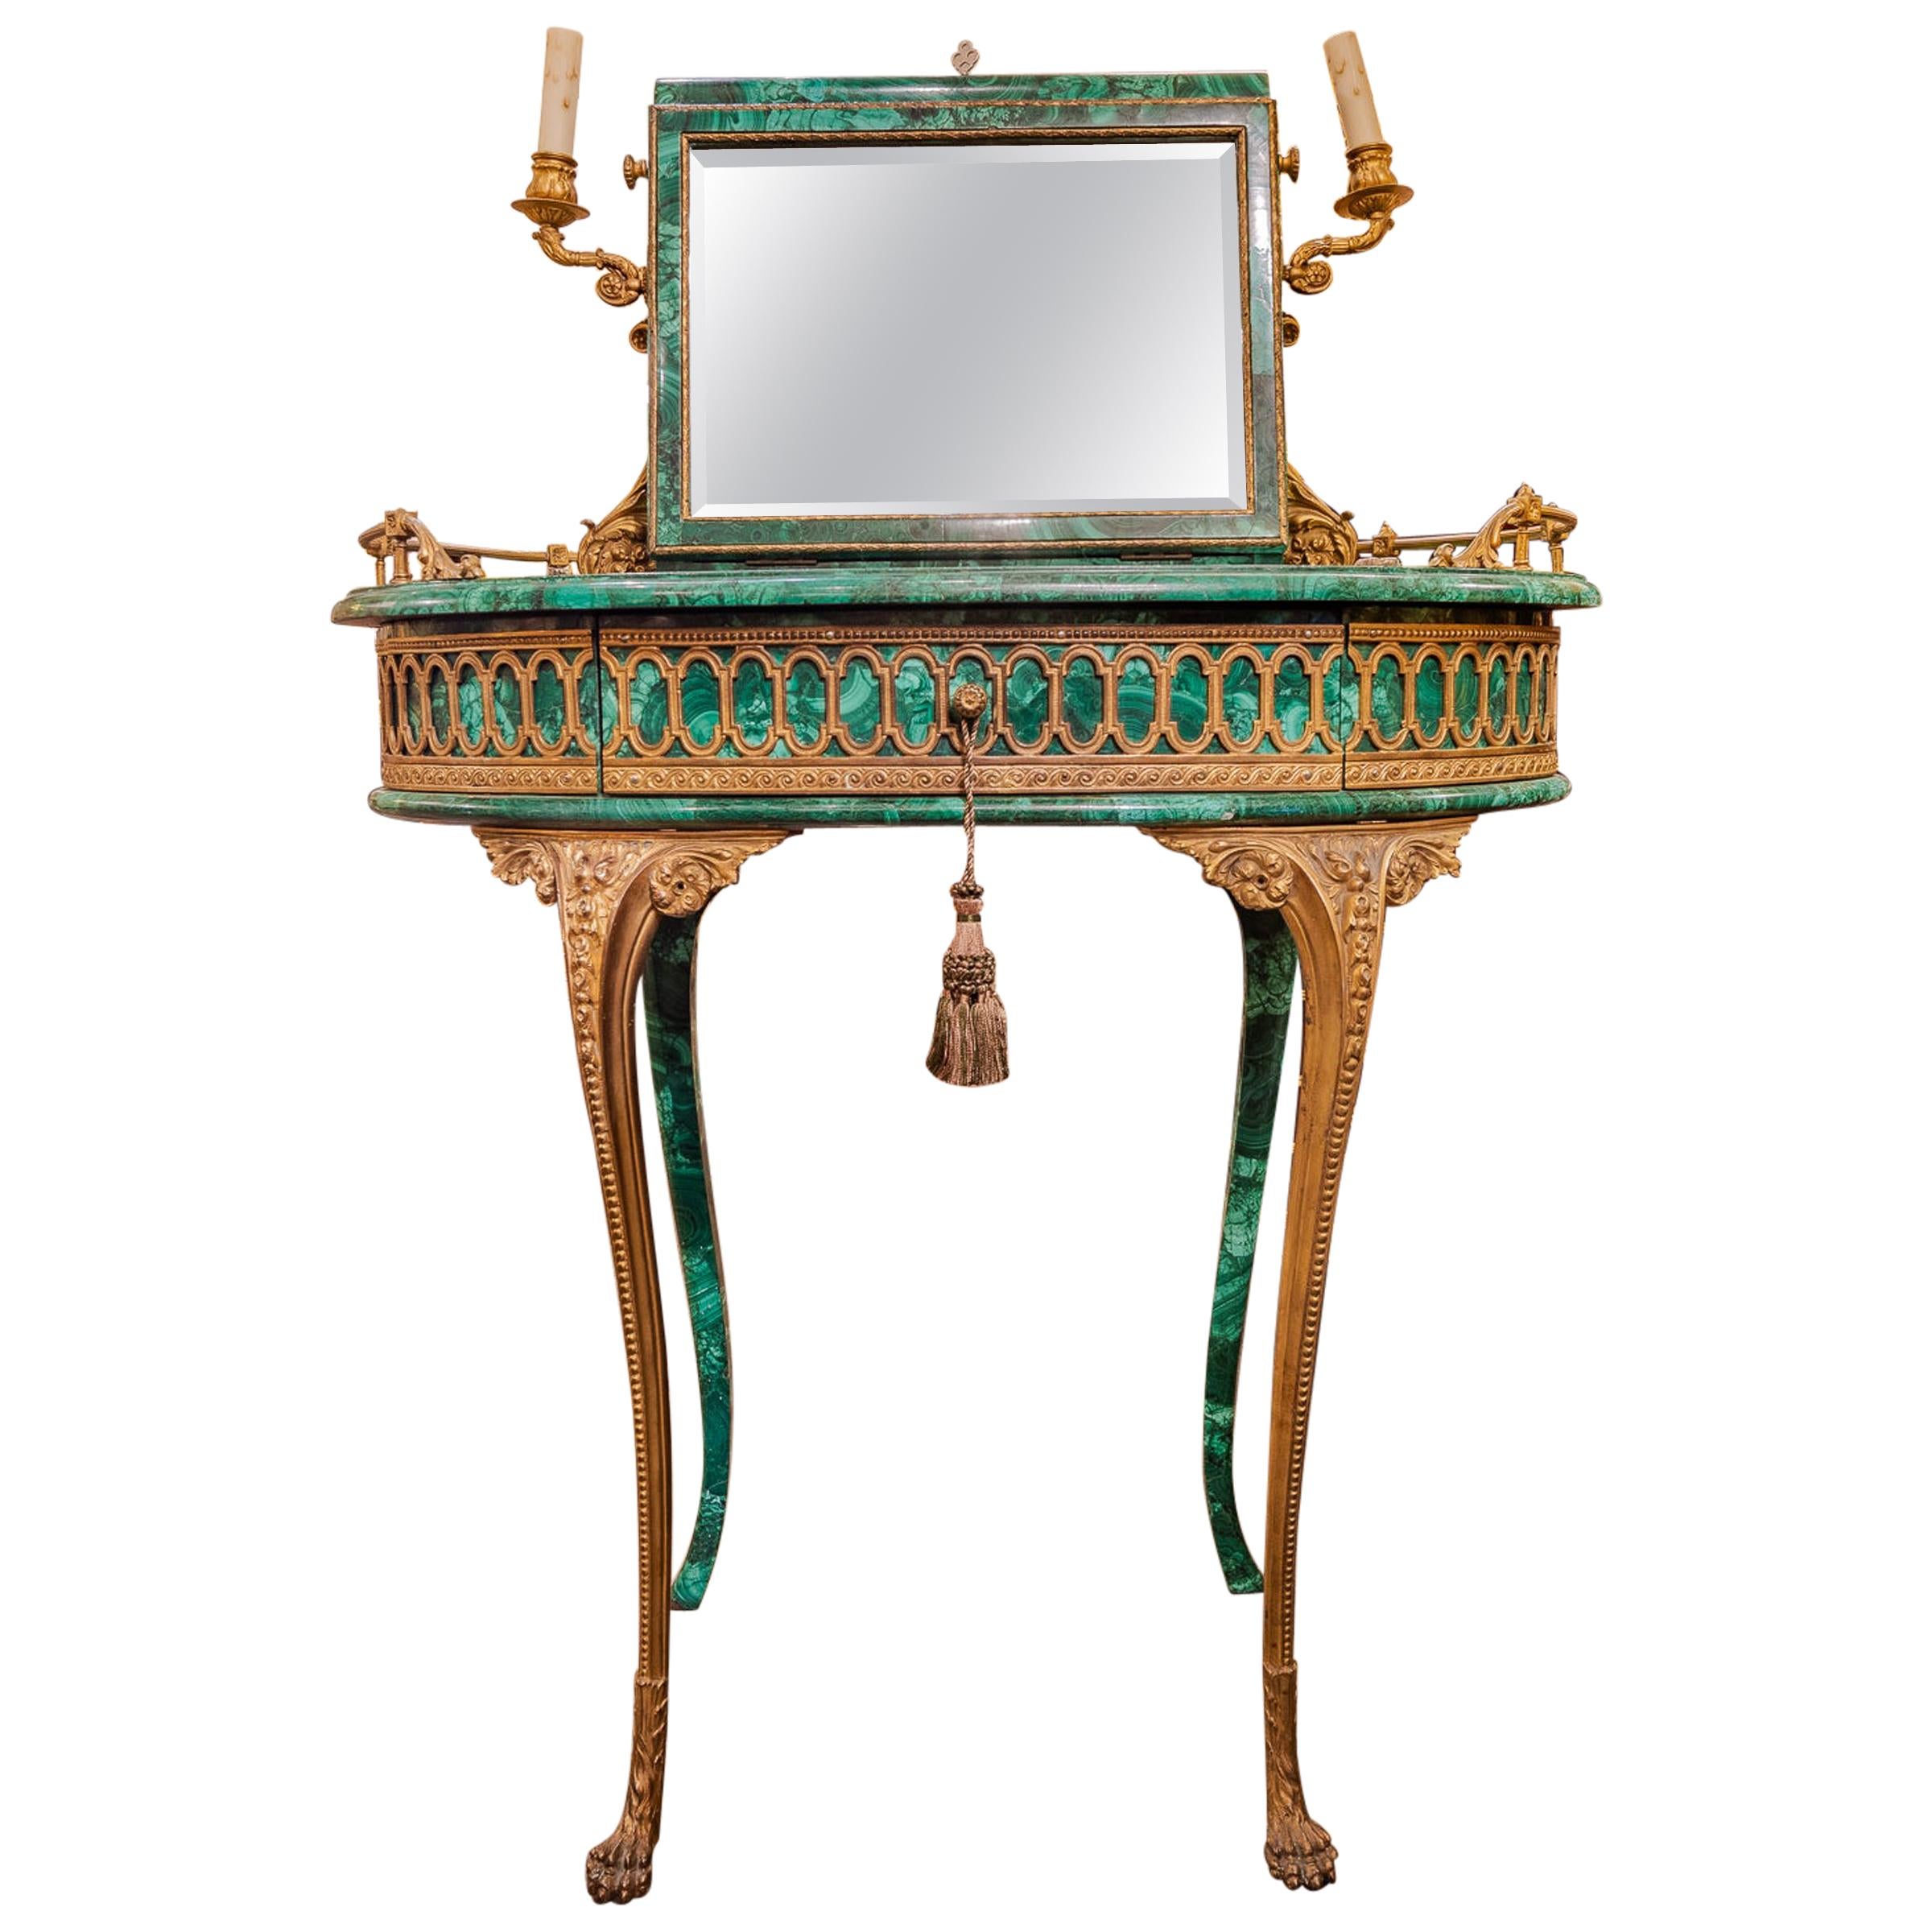 Late 19th Century French Louis XV Gilt Bronze Malachite Desk/Dressing Table For Sale